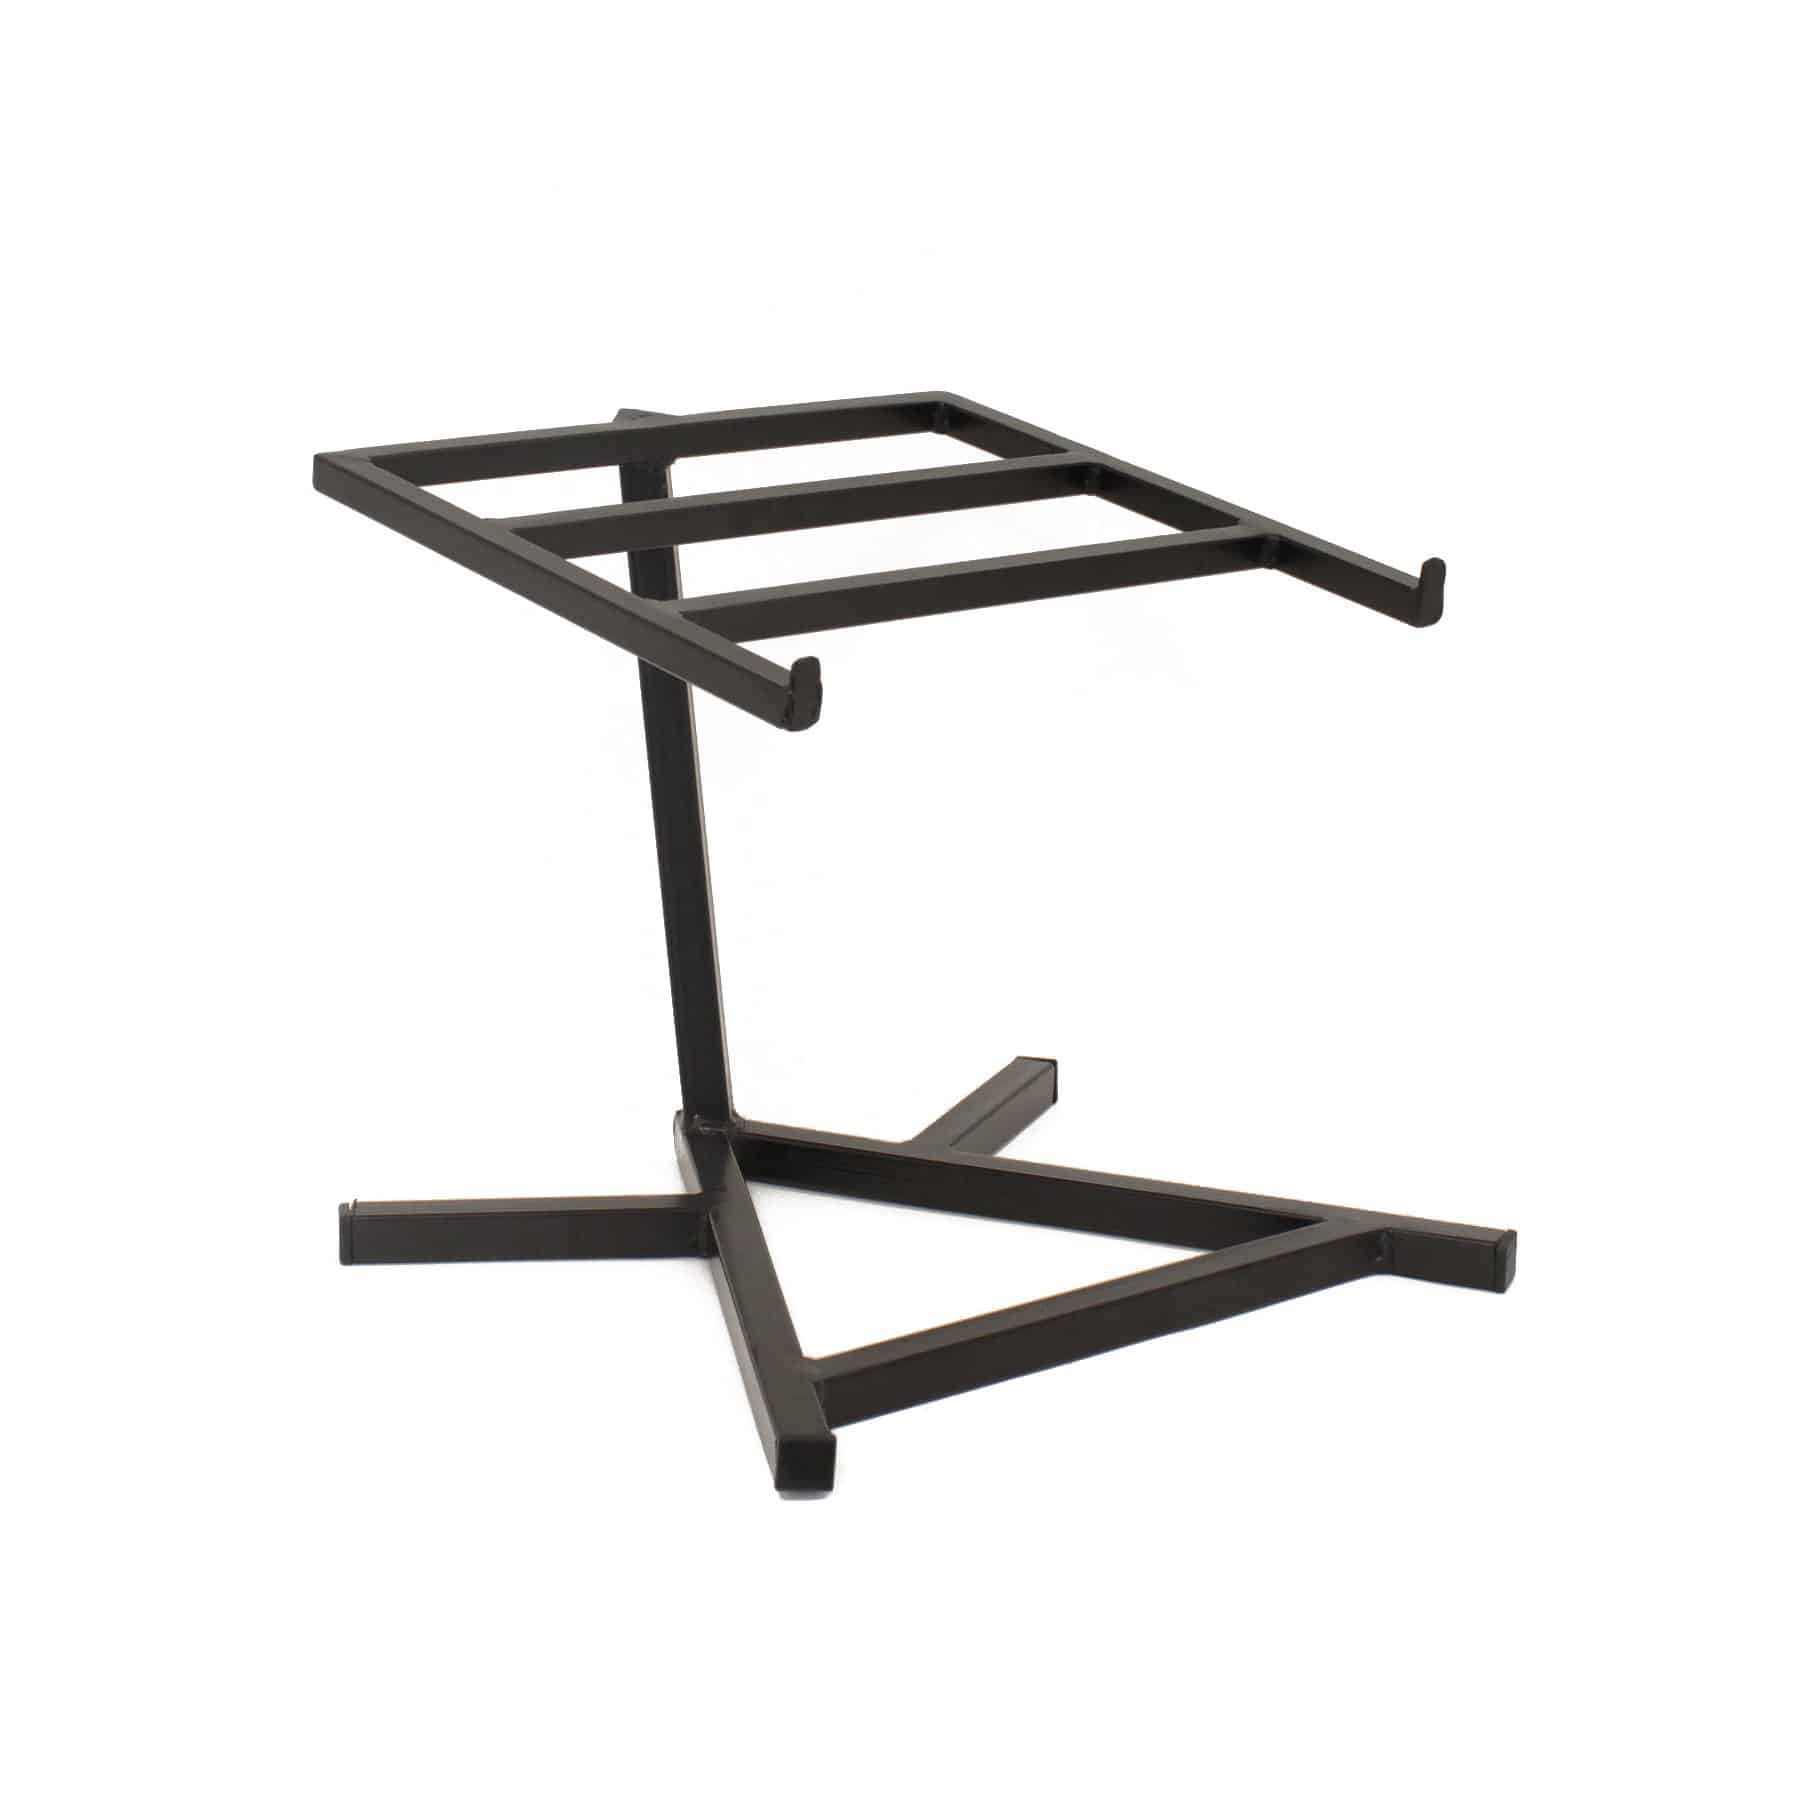 SP185 Metal Counter Top Display Stand : GAD-SP185 From ...